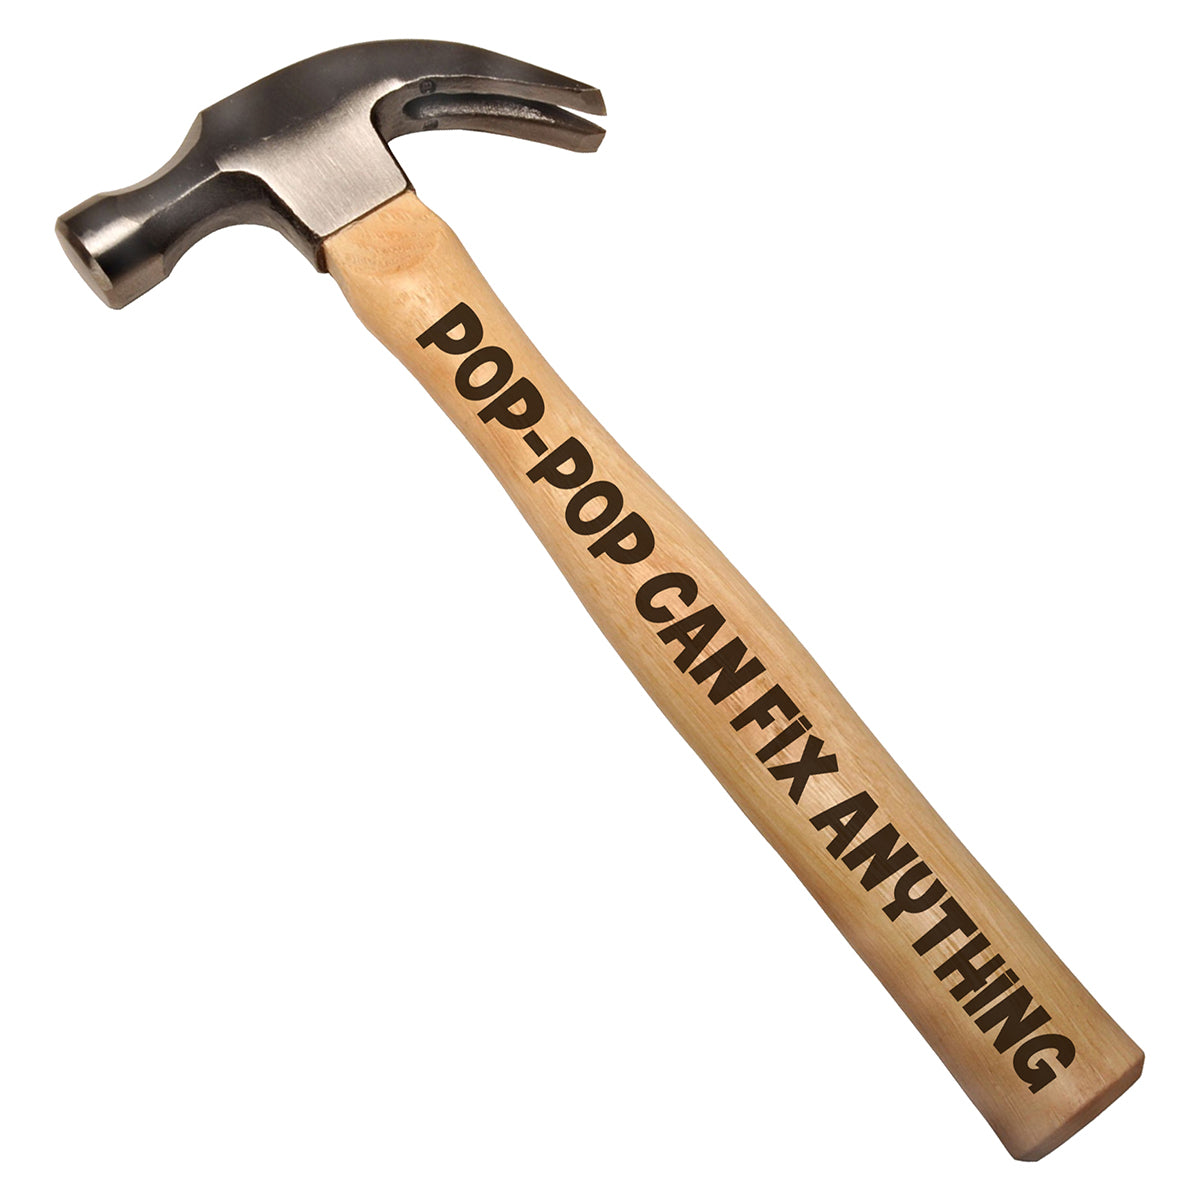 Pop-Pop Can Fix Anything DIY Gift Engraved Wood Handle Steel Hammer